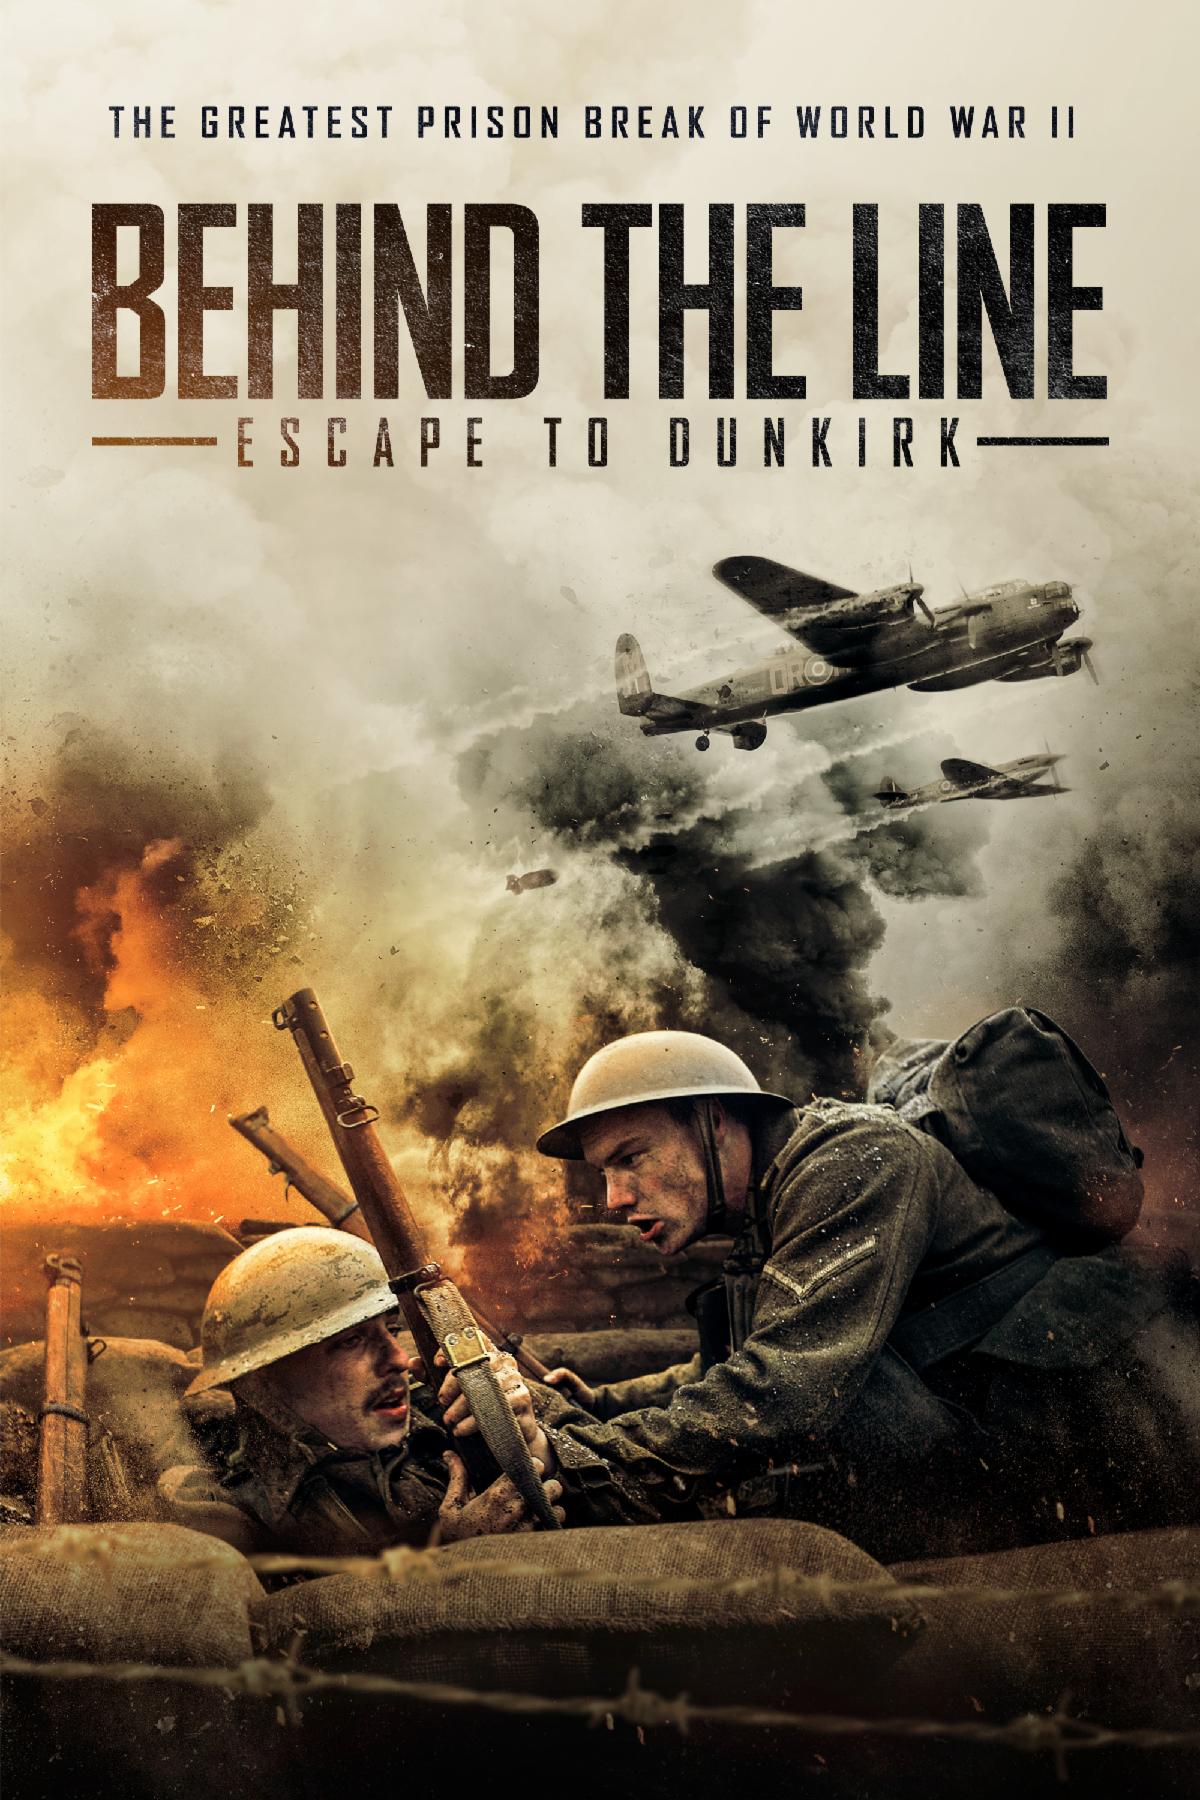 FULL MOVIE: Behind The Line: Escape to Dunkirk (2020)